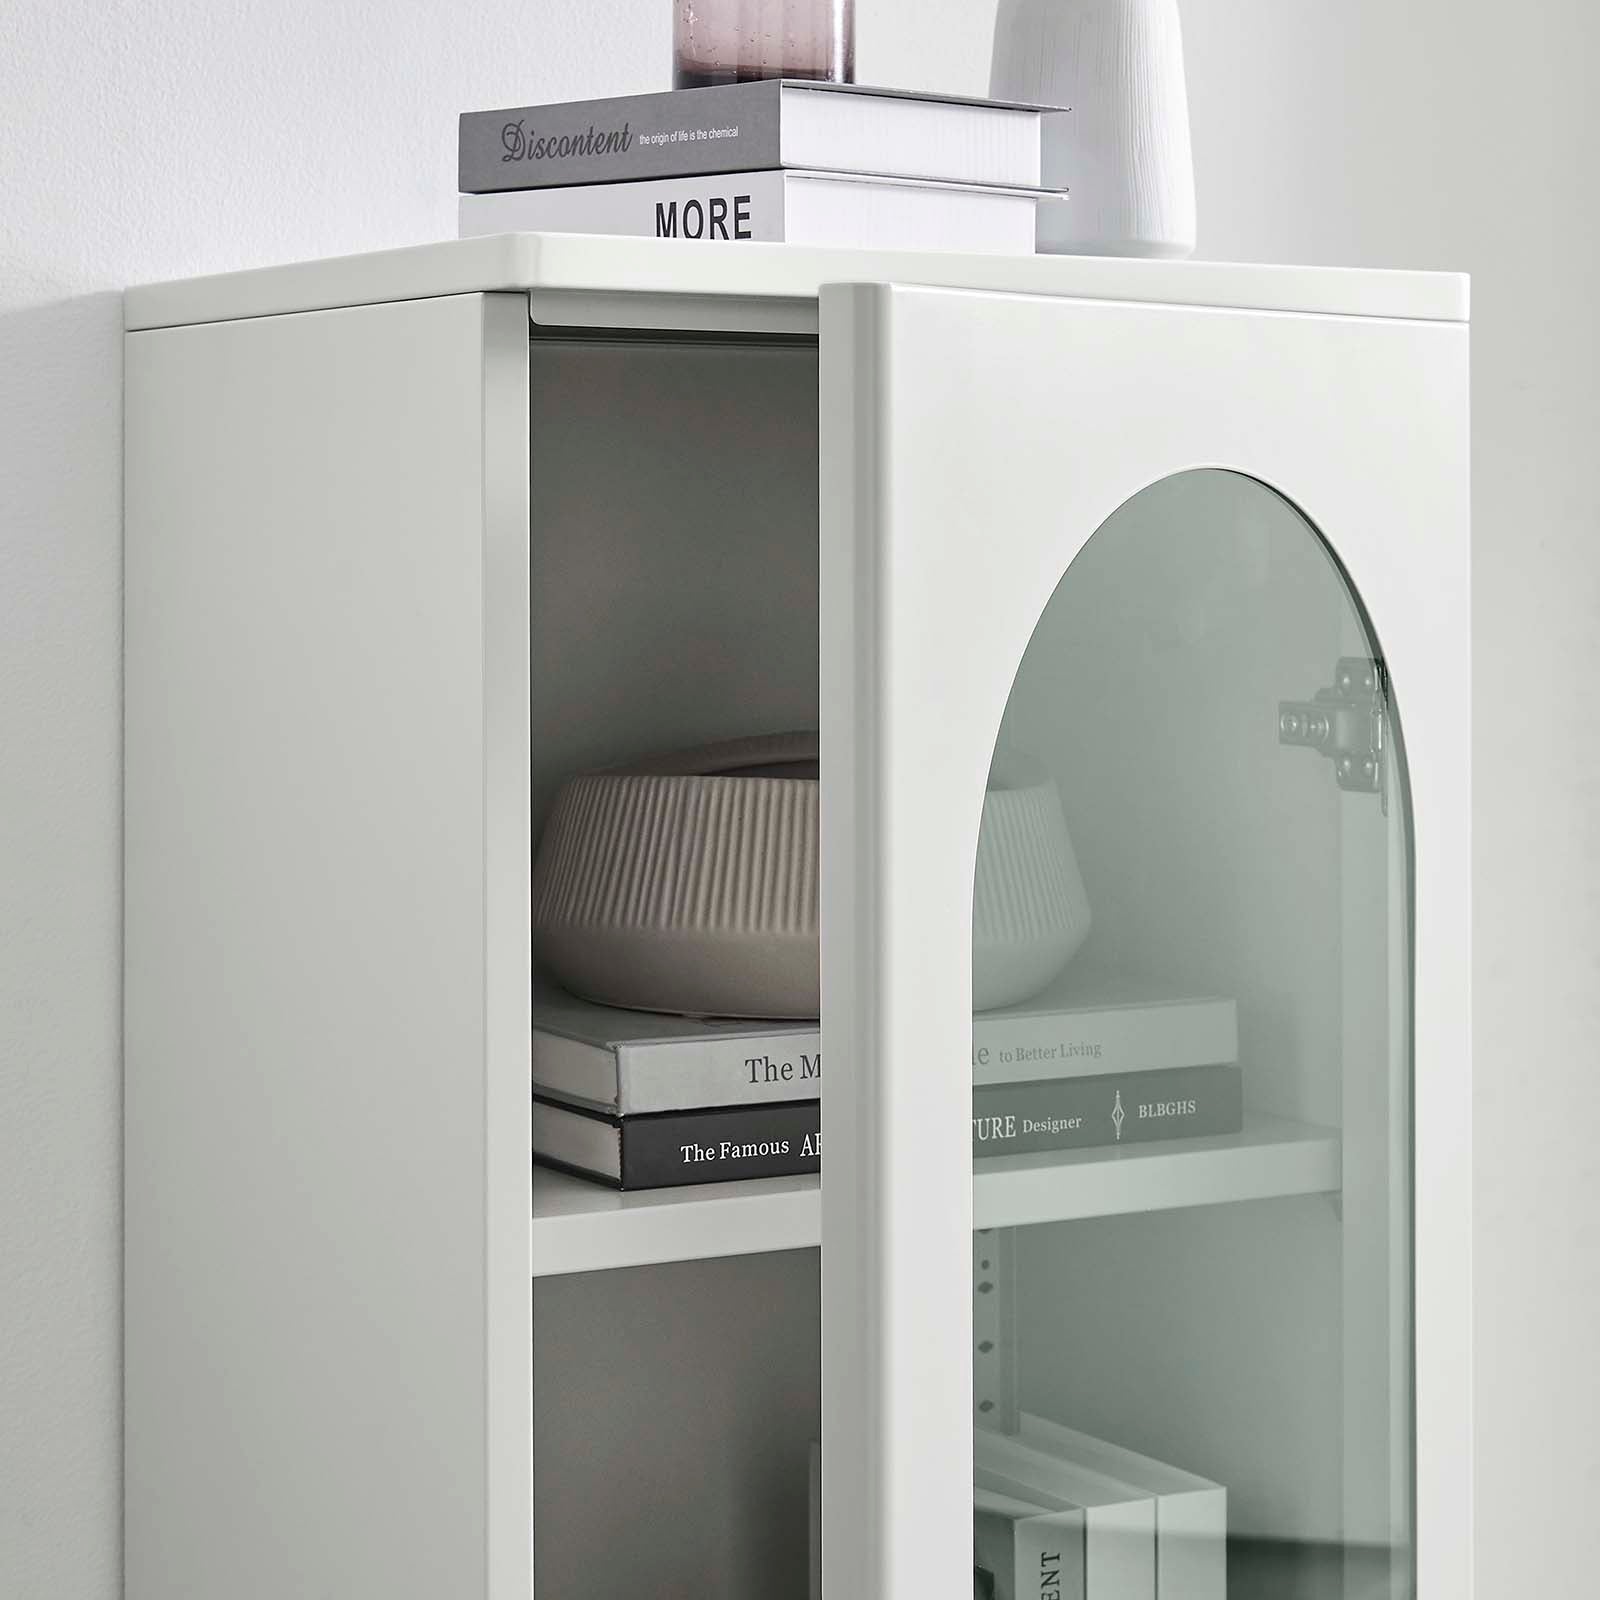 Archway 16" Storage Cabinet - East Shore Modern Home Furnishings